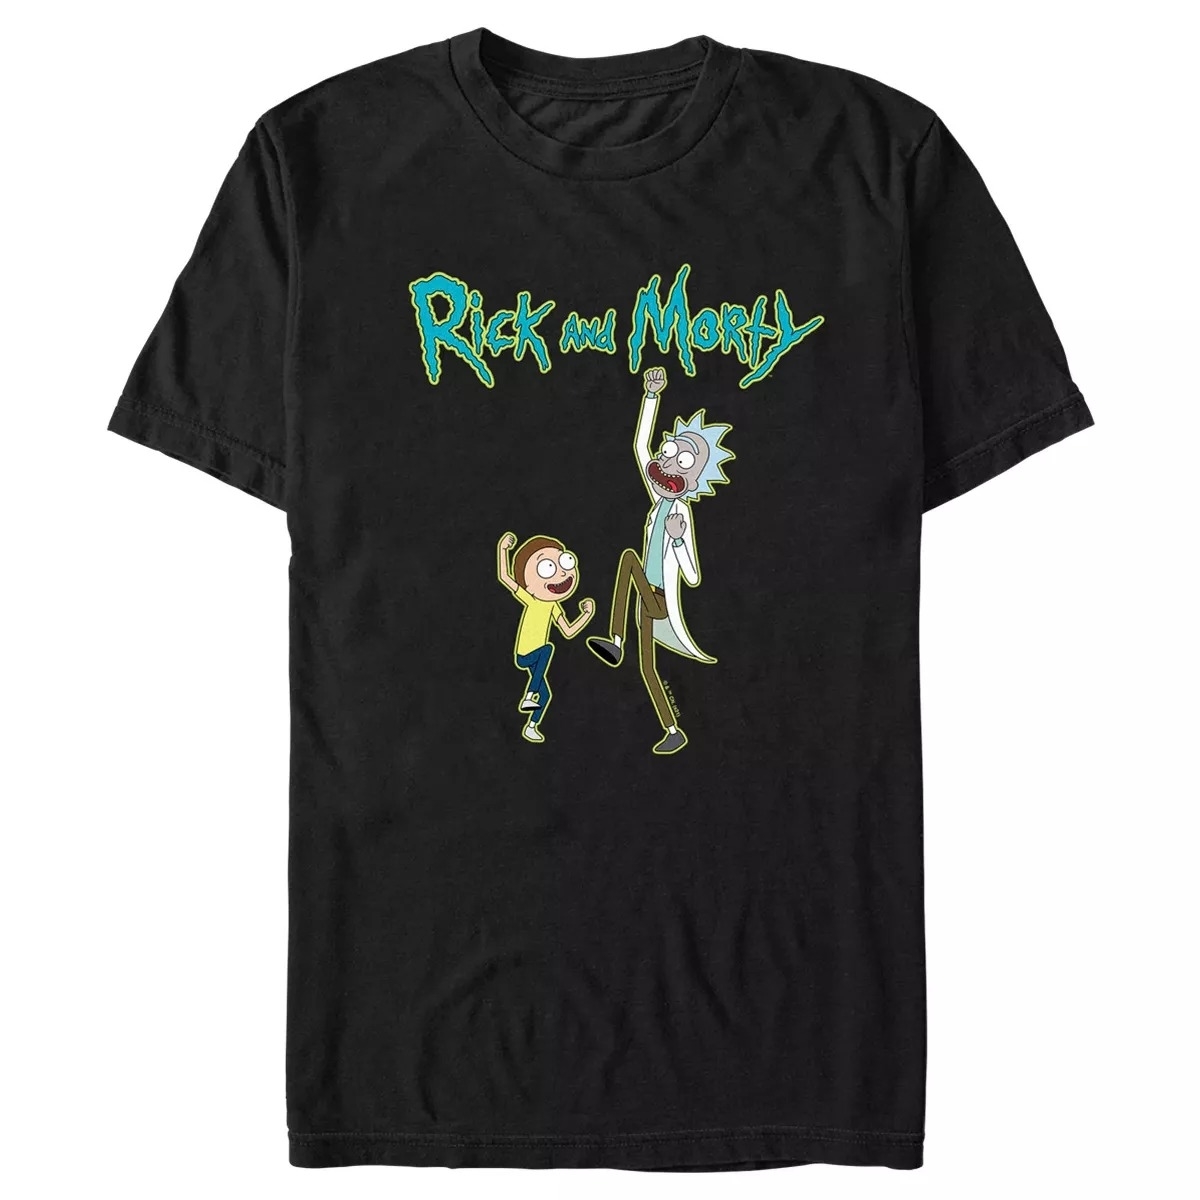 a black tee with rick and morty jumping on it